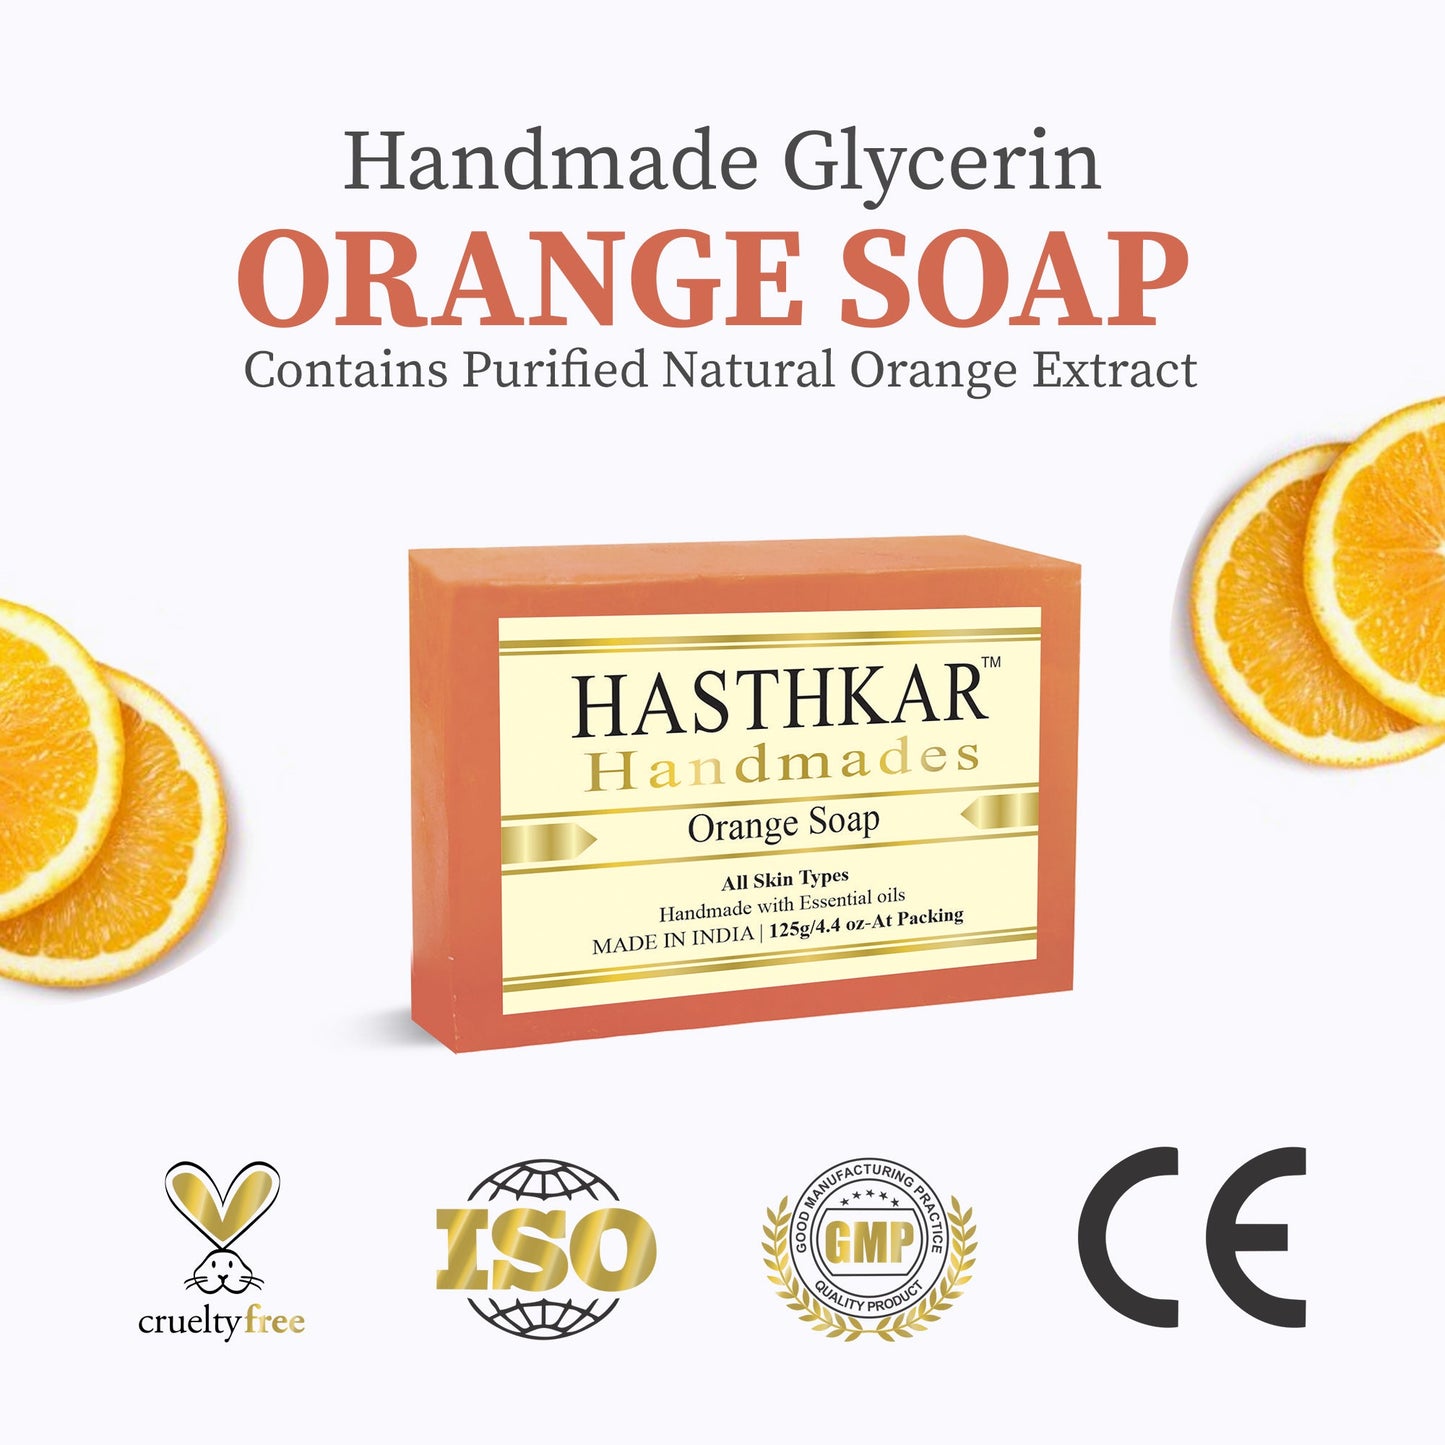 Hasthkar Handmades Glycerine Orange Soap For Nourishes And Exfoliates Your Skin | Relieves Stress And Fatigue And Uplifts Your Mood | Removes Impurities And Reduces Tan | Helps Maintain A Clear Skin Tone - 125Gm